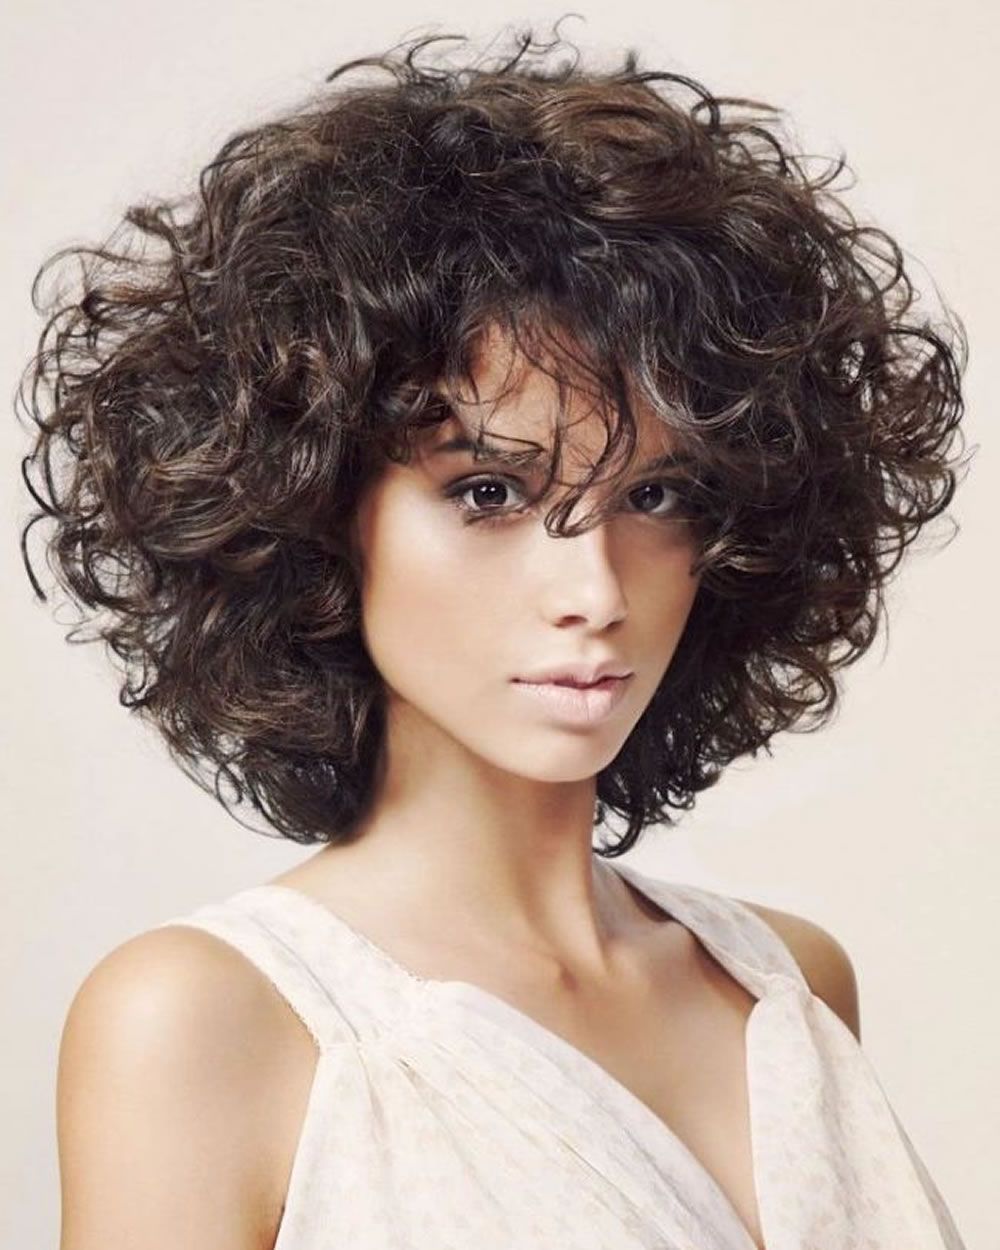 Curly Or Wavy Short Haircuts For 2018? 25 Great Short Bob Hairstyles Pertaining To Short Bob For Curly Hairstyles (View 19 of 25)